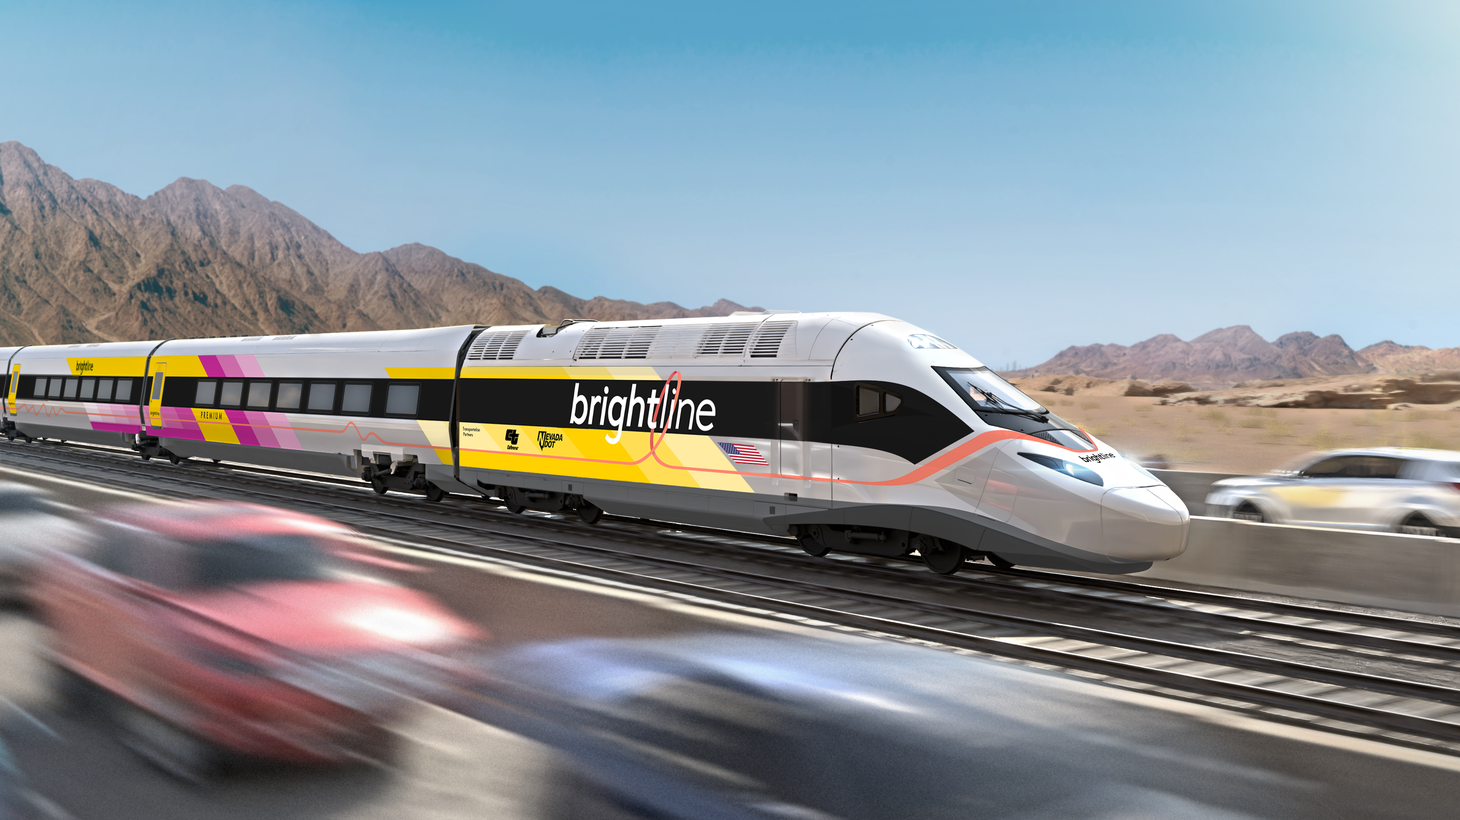 Brightline West’s train would get travelers from Rancho Cucamonga to Las Vegas in two hours.